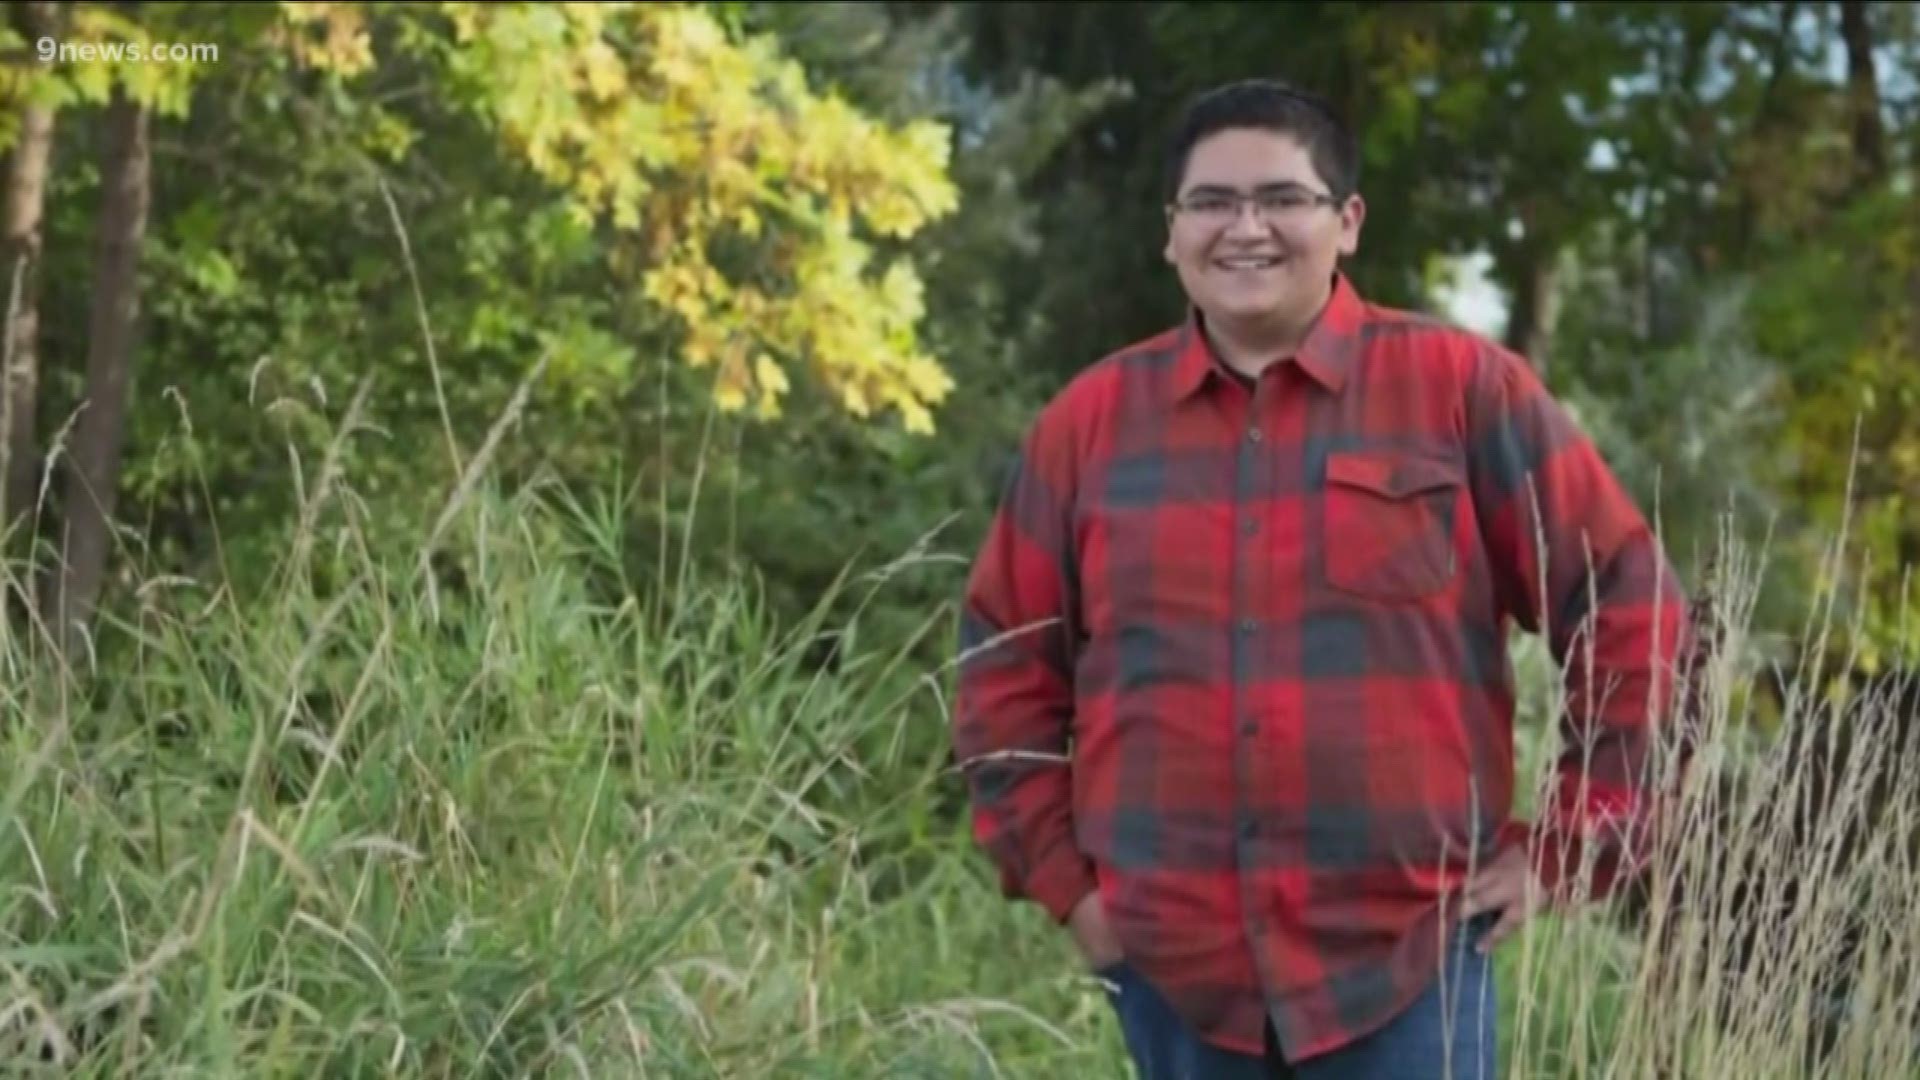 Two students are accused of carrying out the shooting at STEM School Highlands Ranch in May that killed Kendrick Castillo and injured several others.